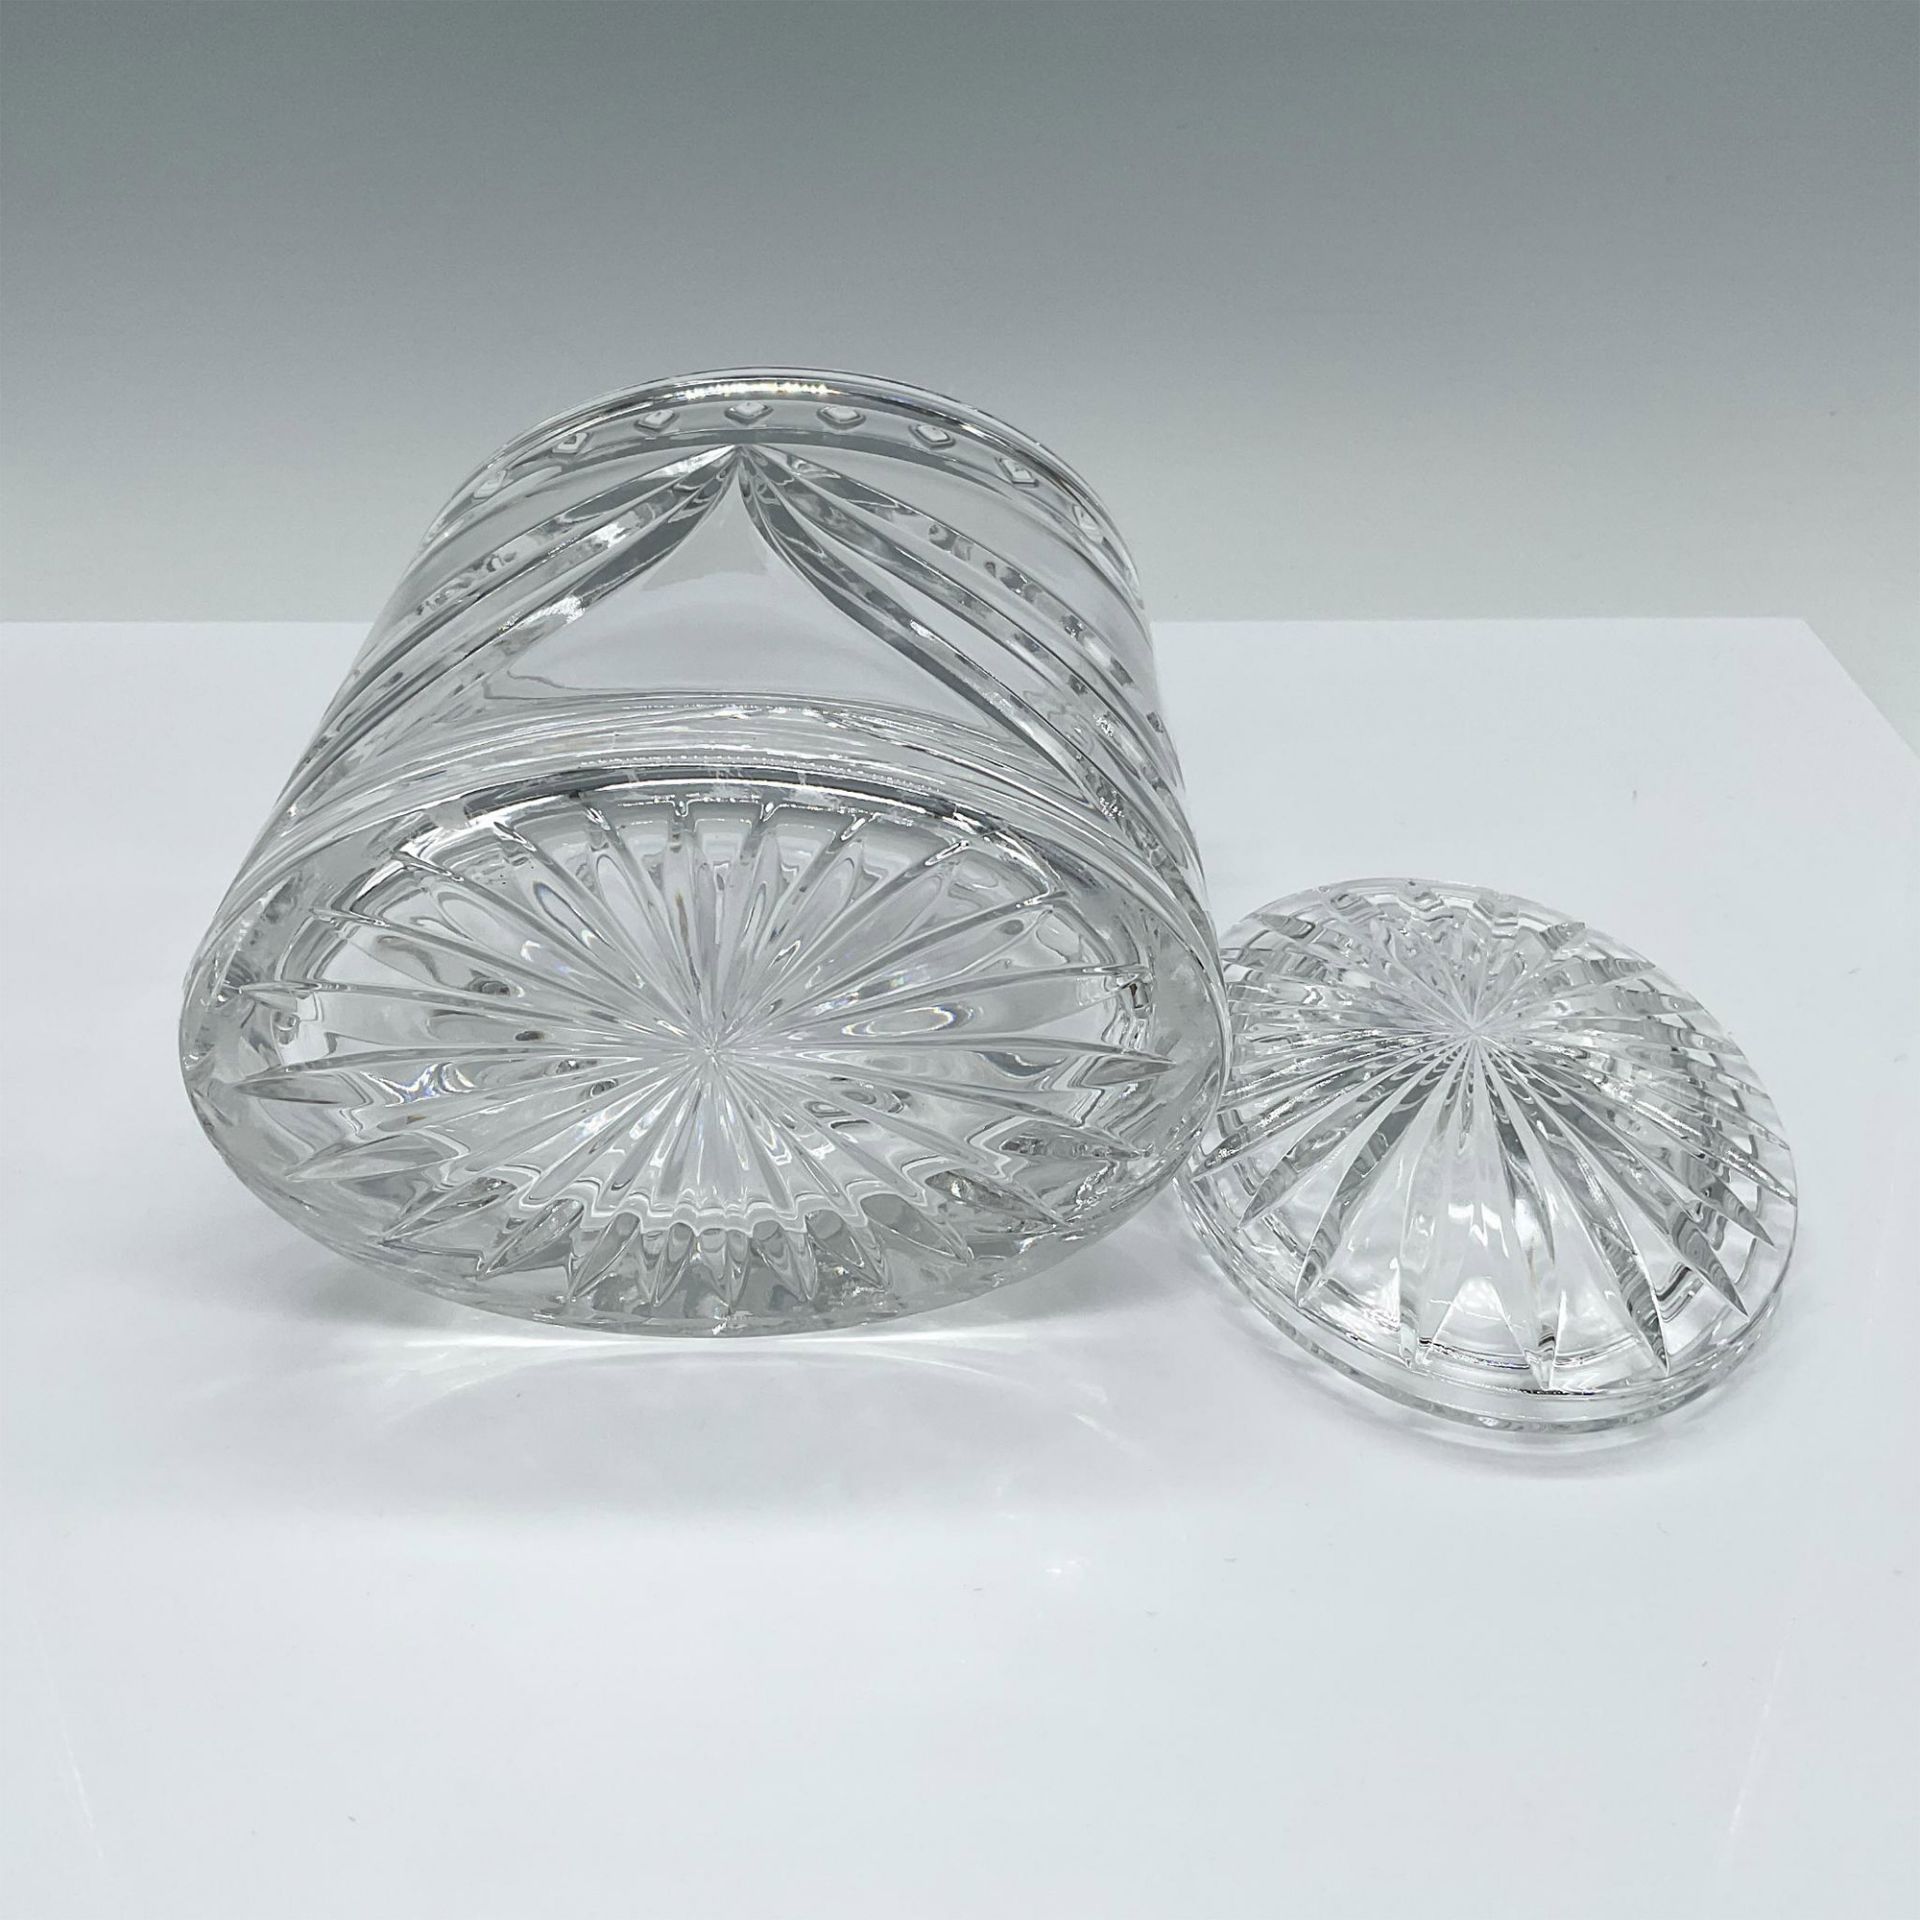 Waterford Crystal Oval Shaped Cookie Jar, Overture Pattern - Image 3 of 4